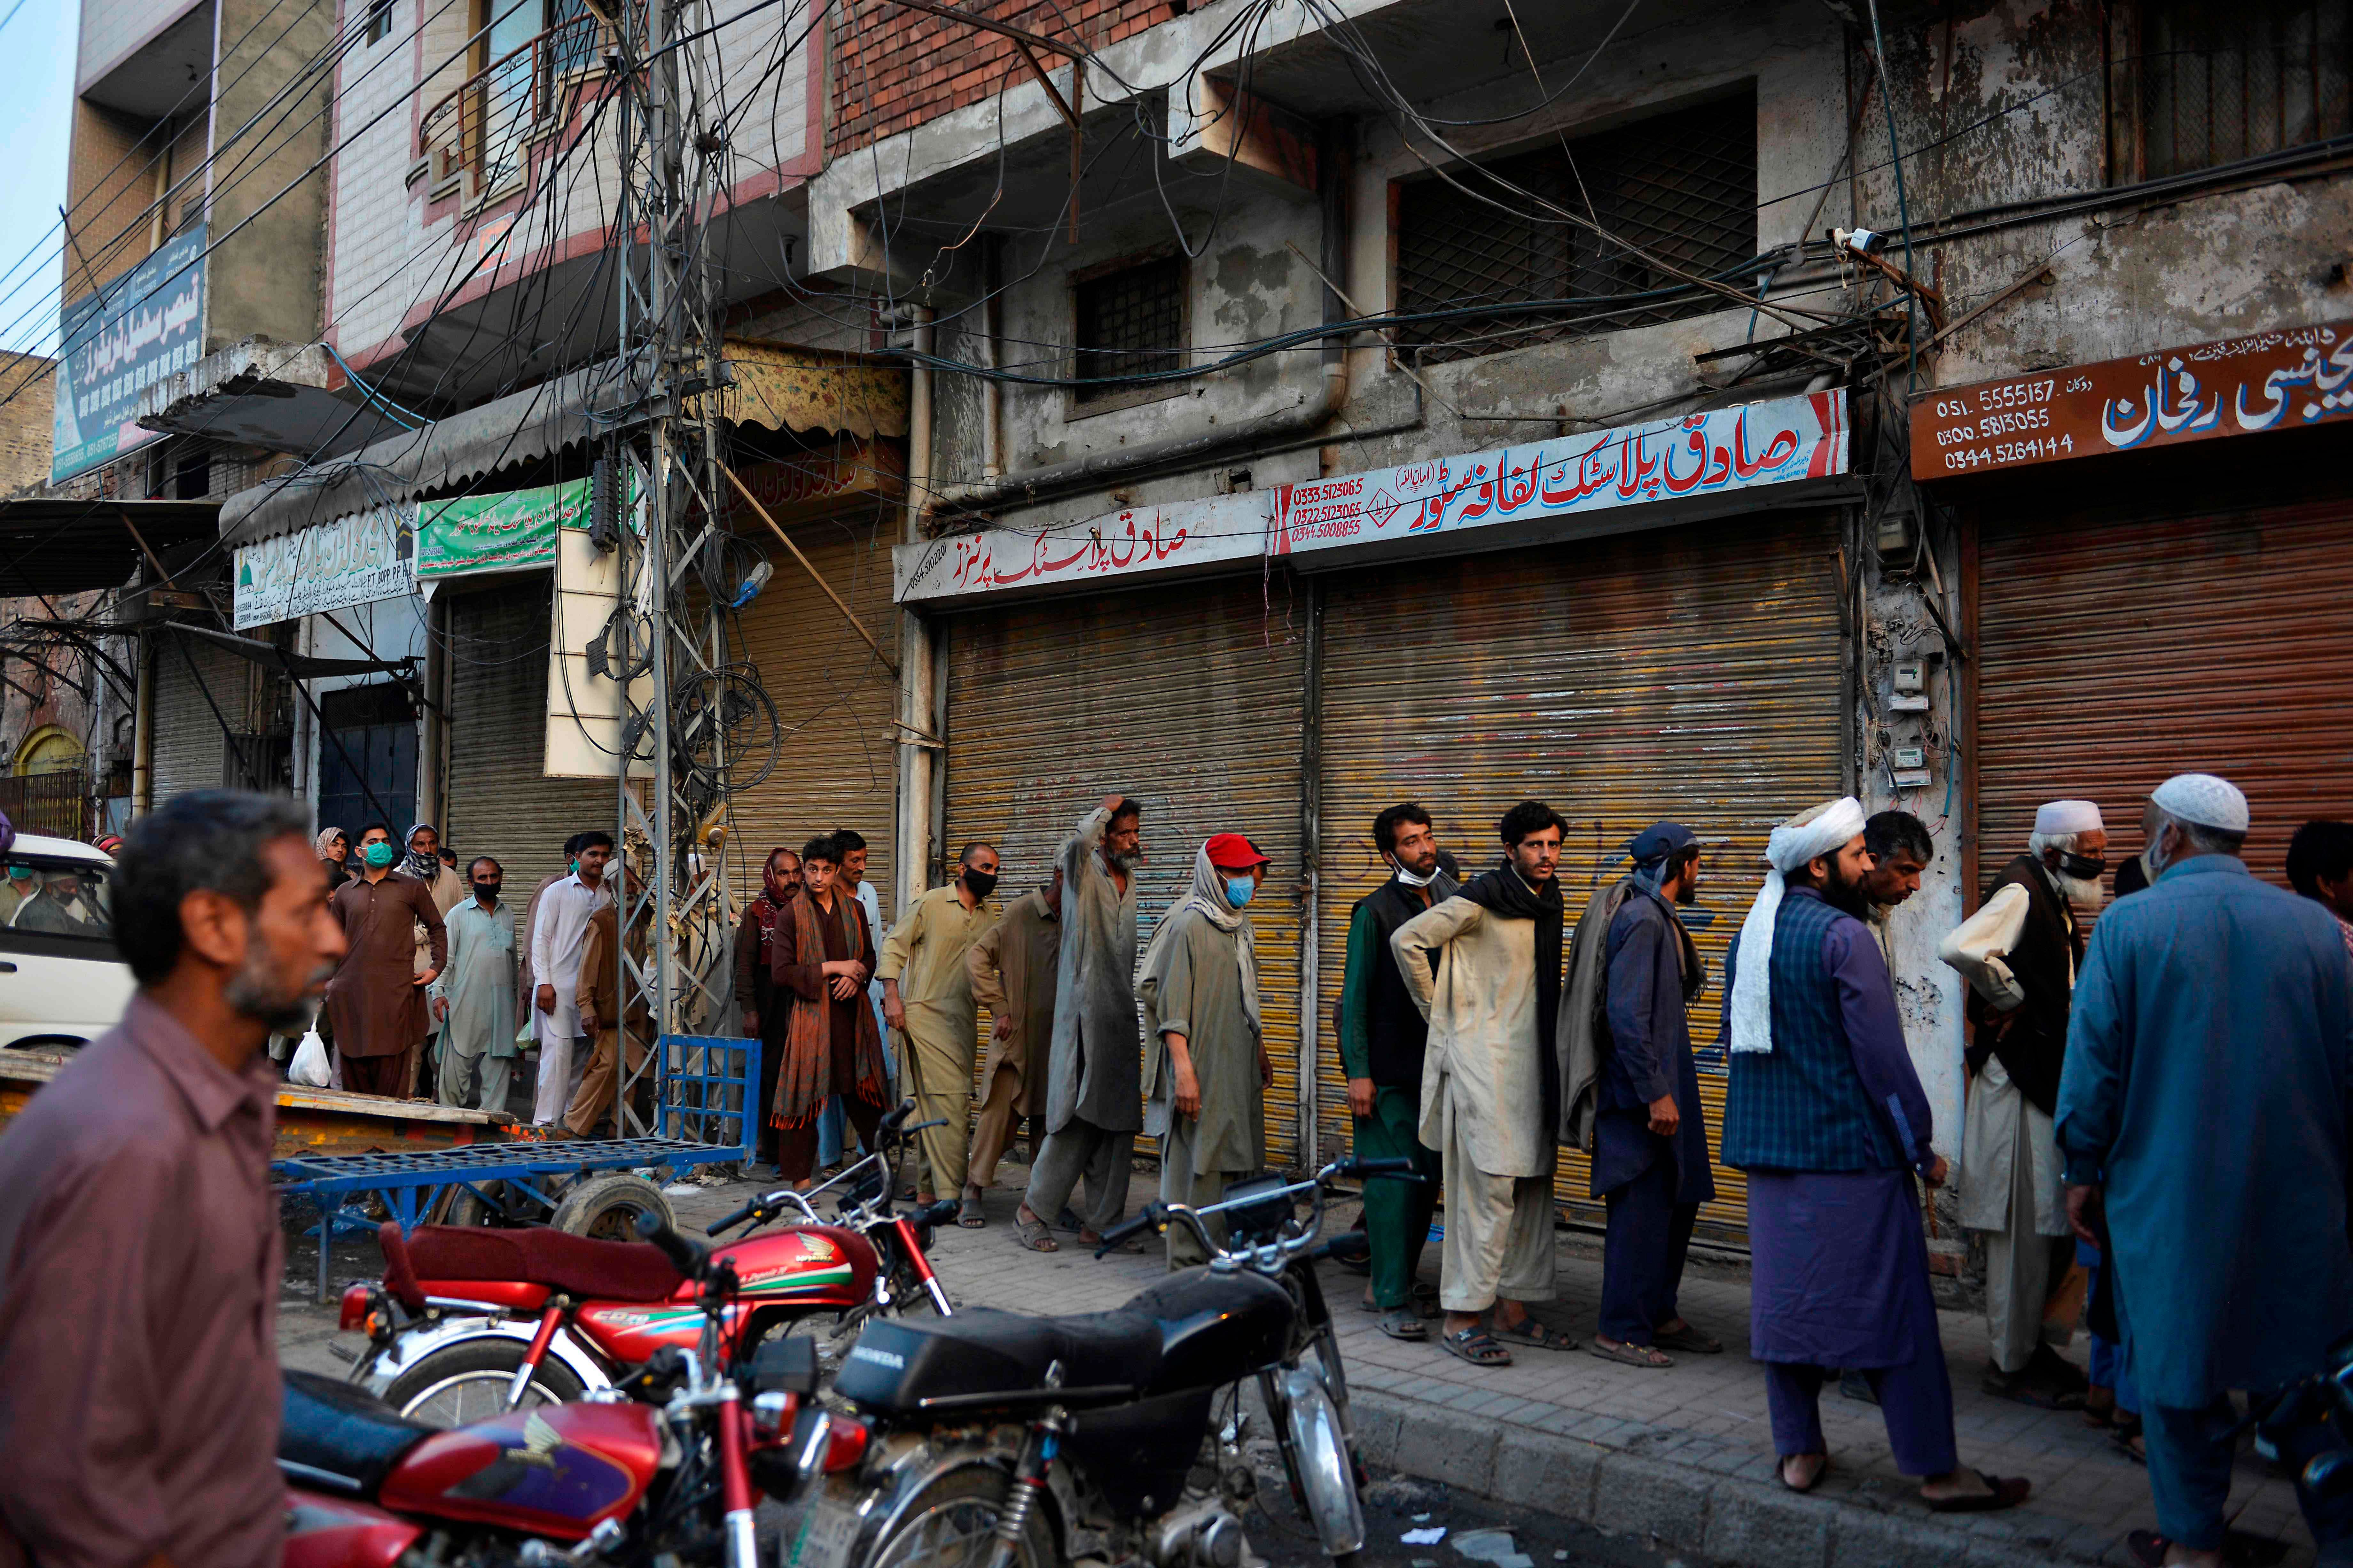 Pakistani labourers queue for free iftar food on the Islamic holy month of Ramadan during a government-imposed nationwide lockdown as a preventive measure against the COVID-19. (AFP Photo)